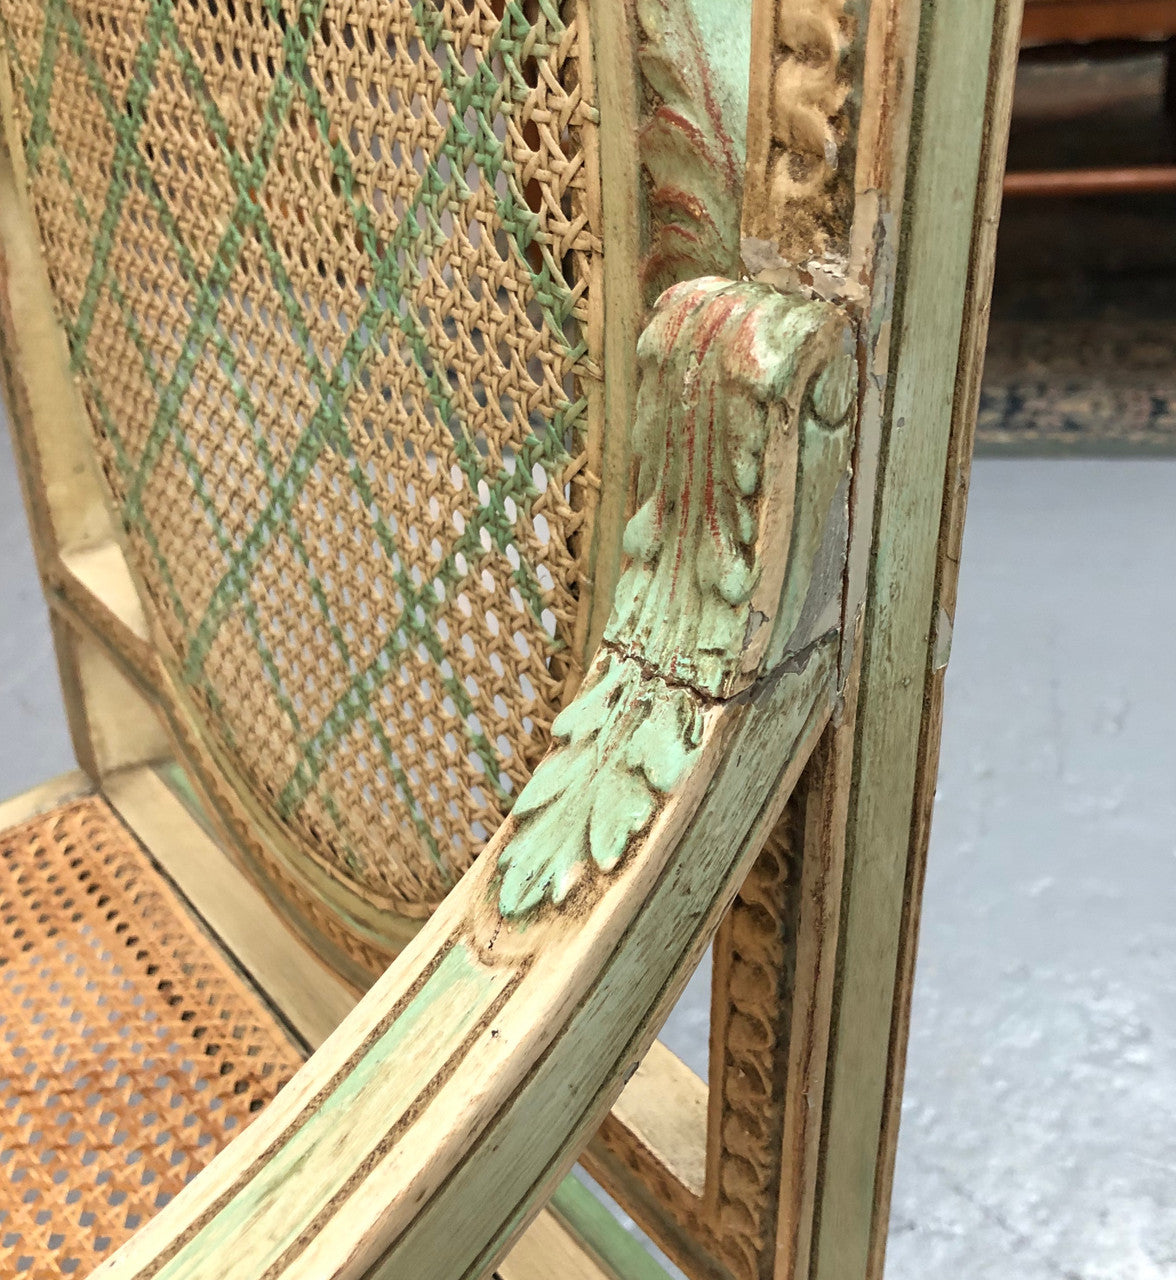 Painted French Louis XVI style cane panel arm chair. Paint is original and it is in very good original condition.